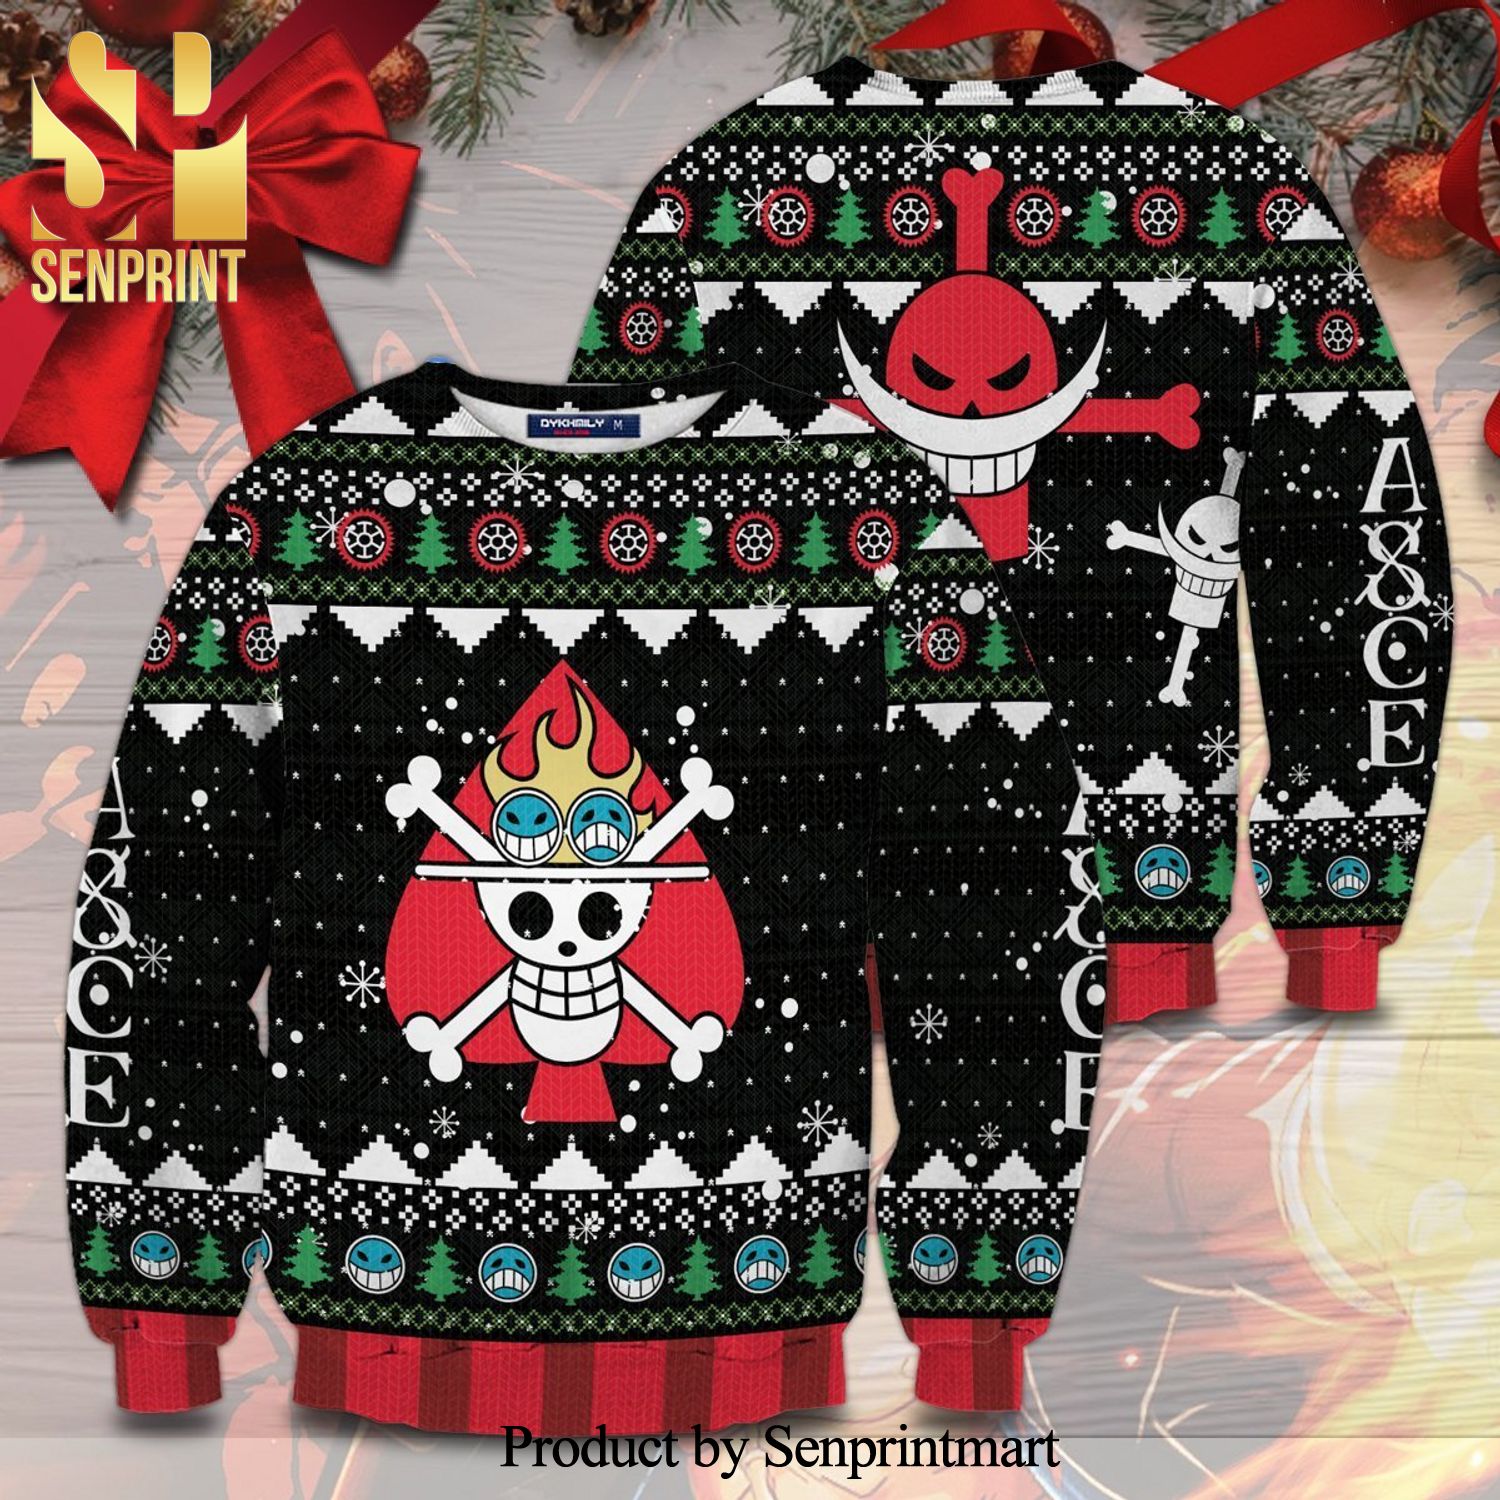 Ace Pirate One Piece Manga Anime Knitted Ugly Christmas Sweater